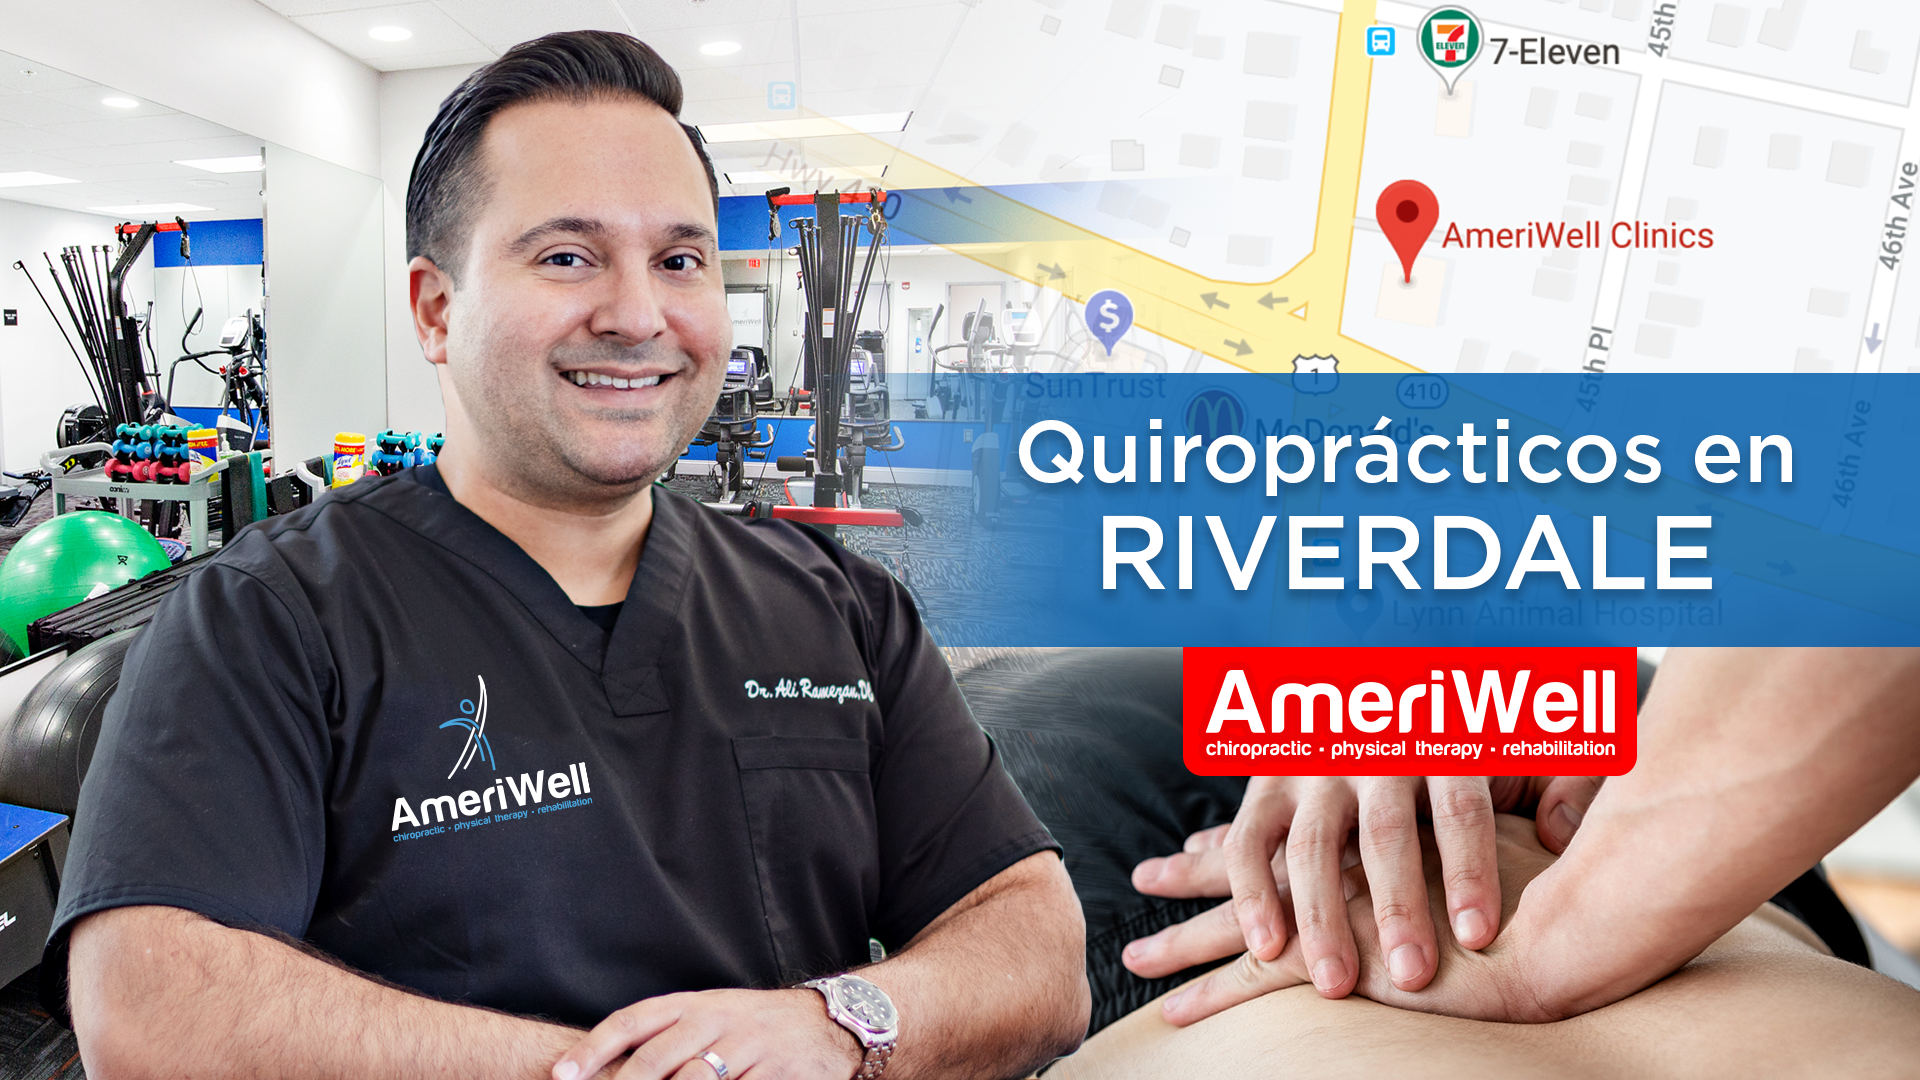 Riverdale - Ameriwell Clinics the best chiropractors